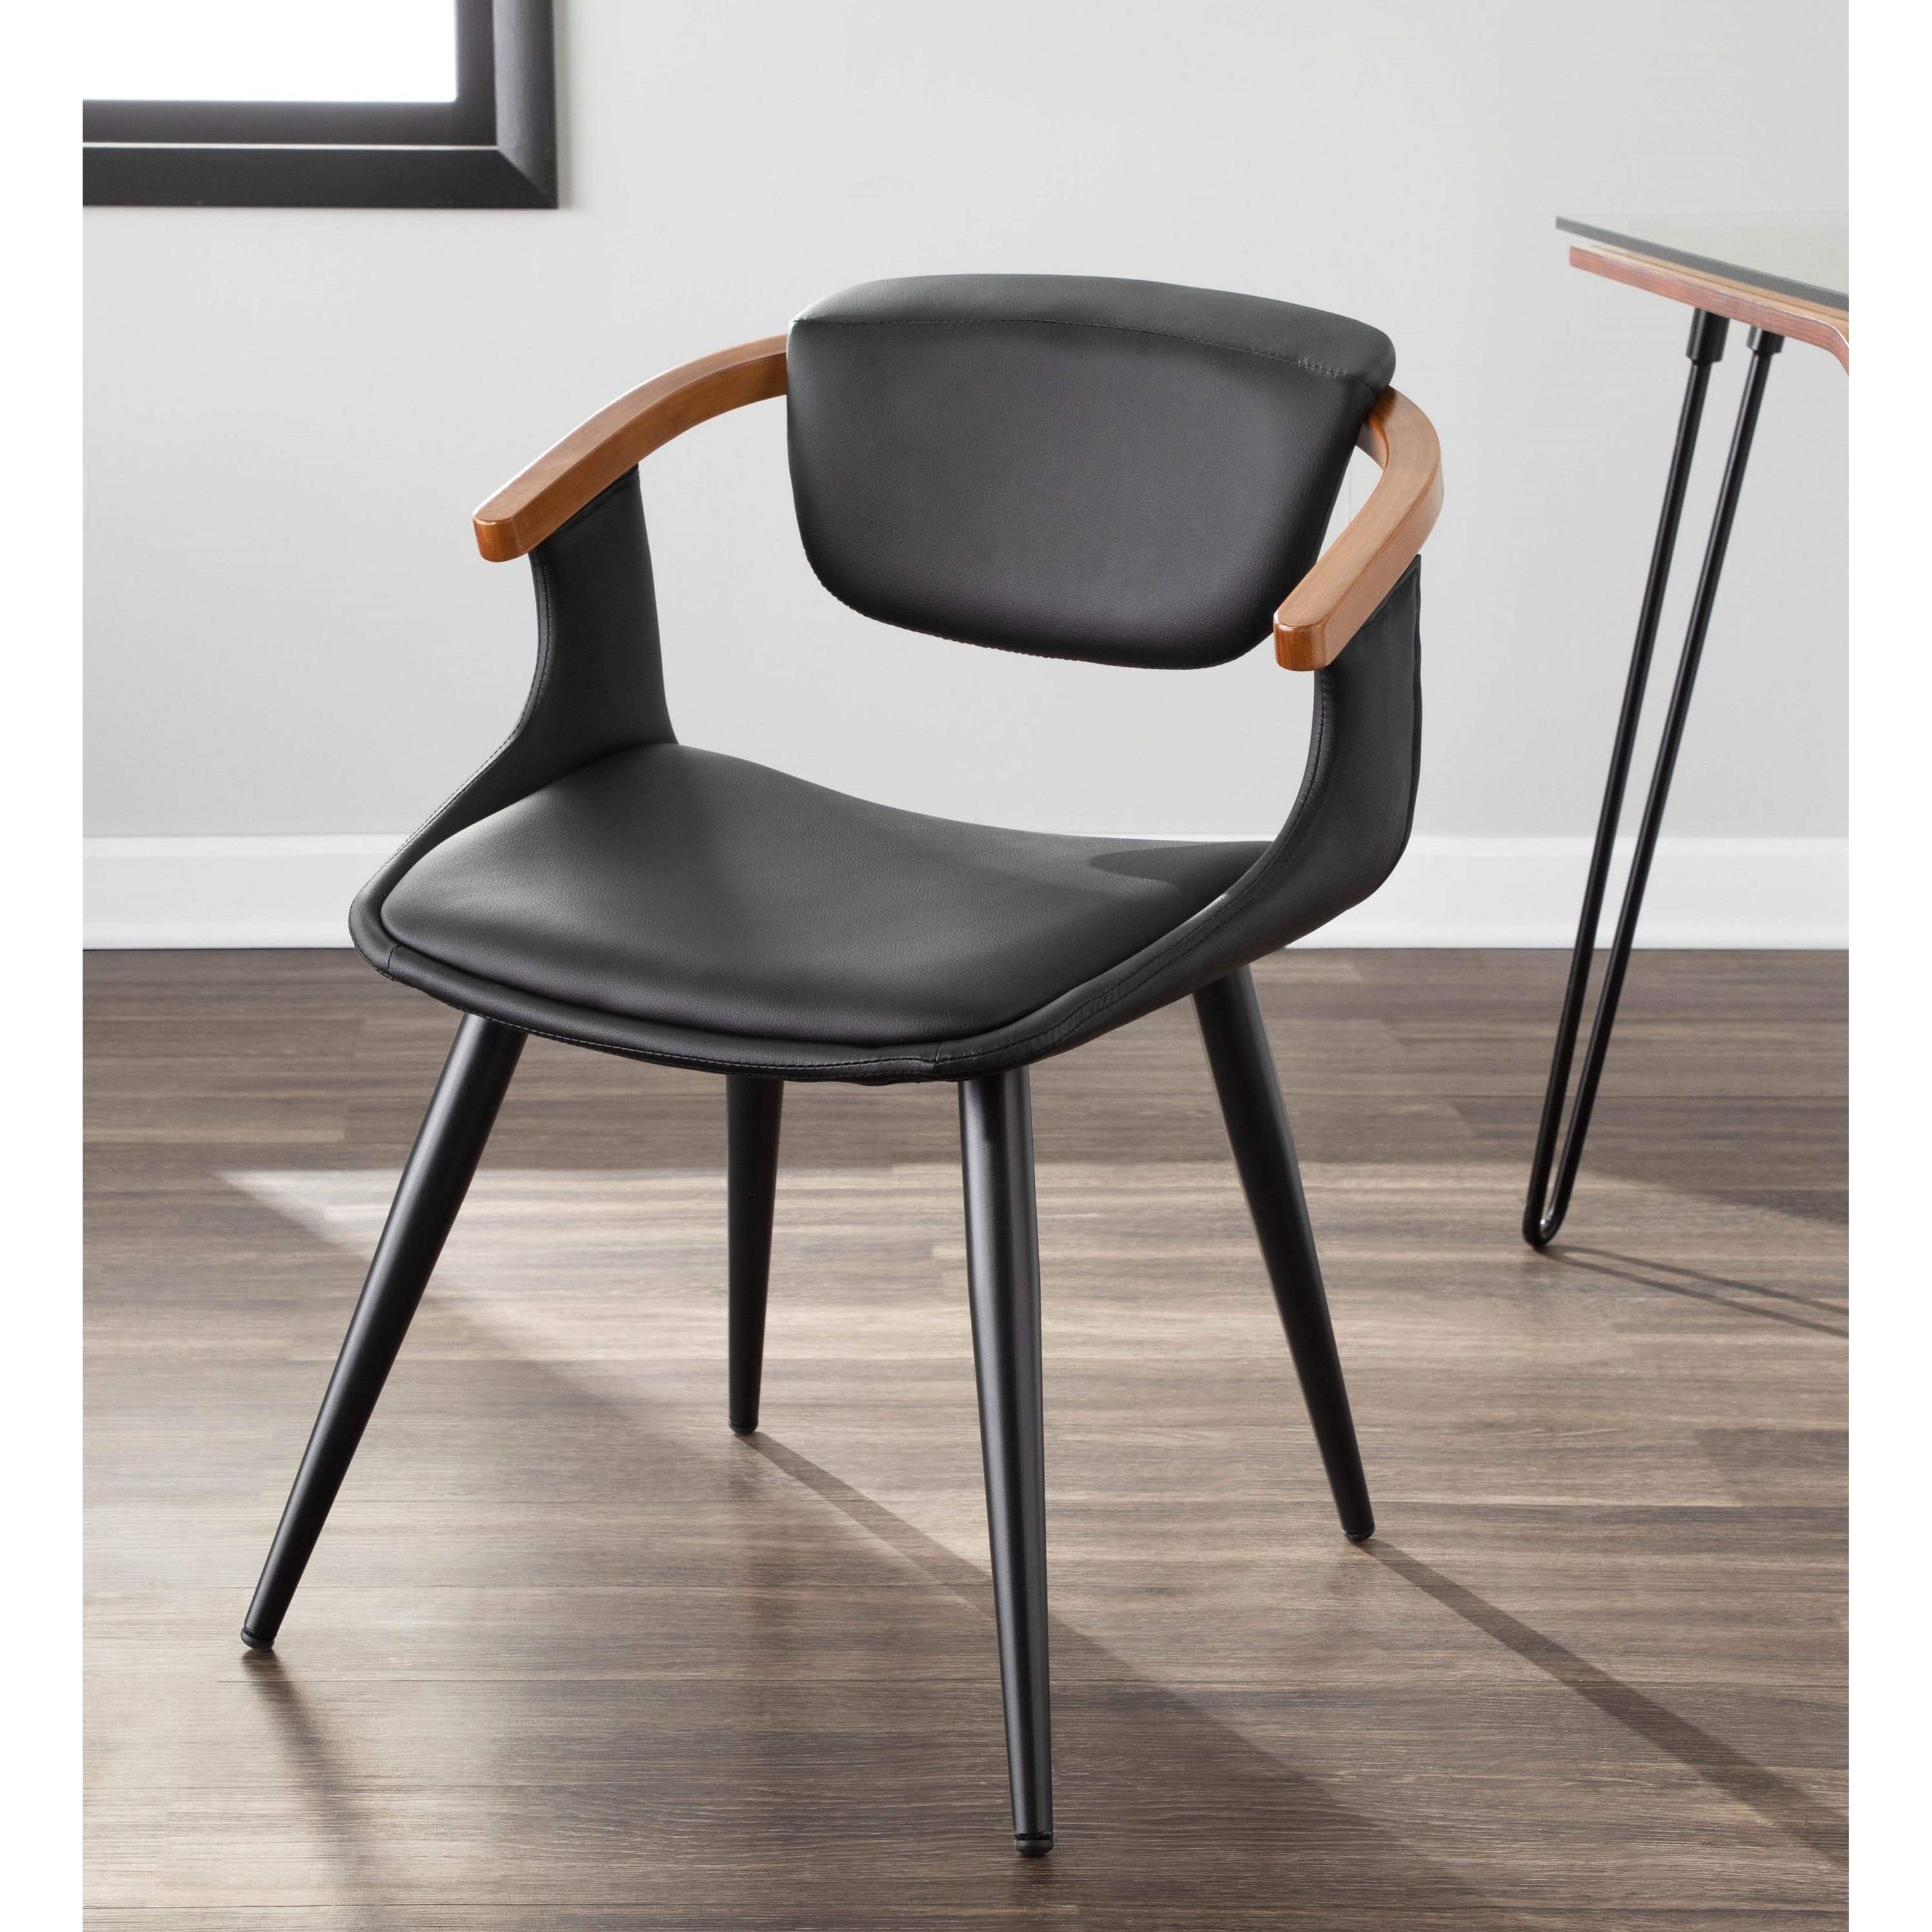 oracle midcentury modern dining chair in faux leather black metal   walnut wood  na